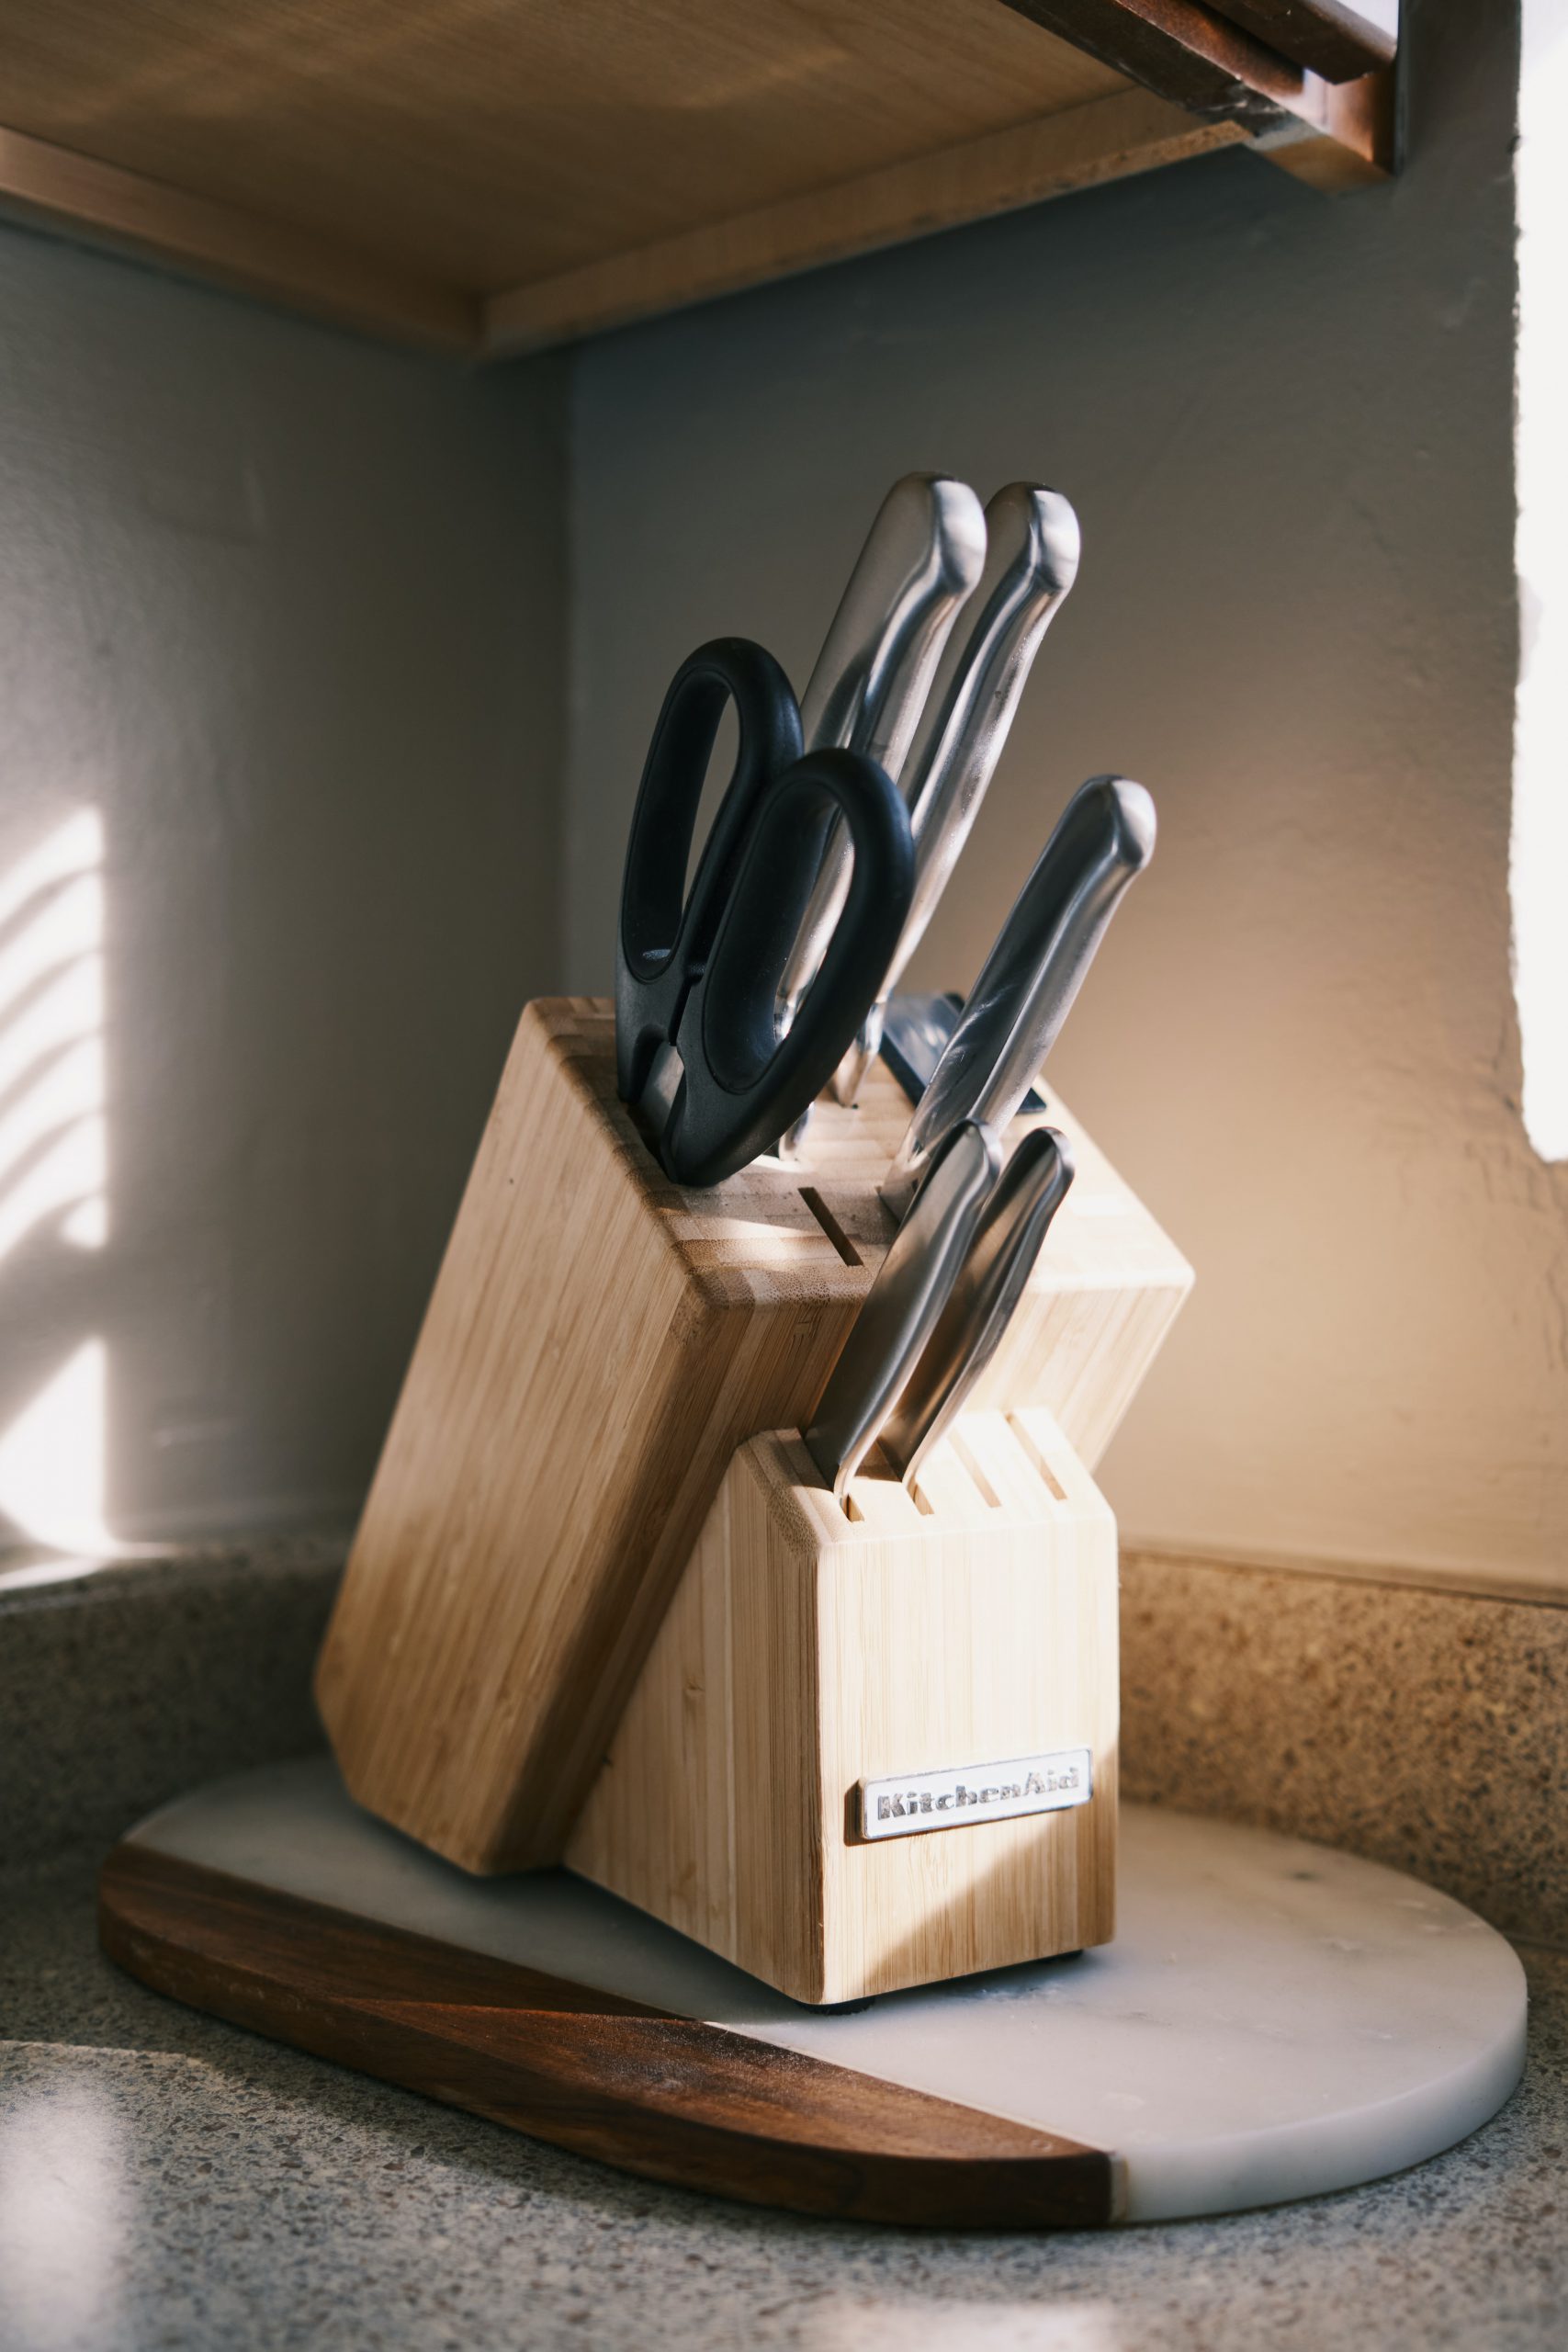 https://www.cookly.me/magazine/wp-content/uploads/2022/04/wooden-knife-block-scaled.jpg